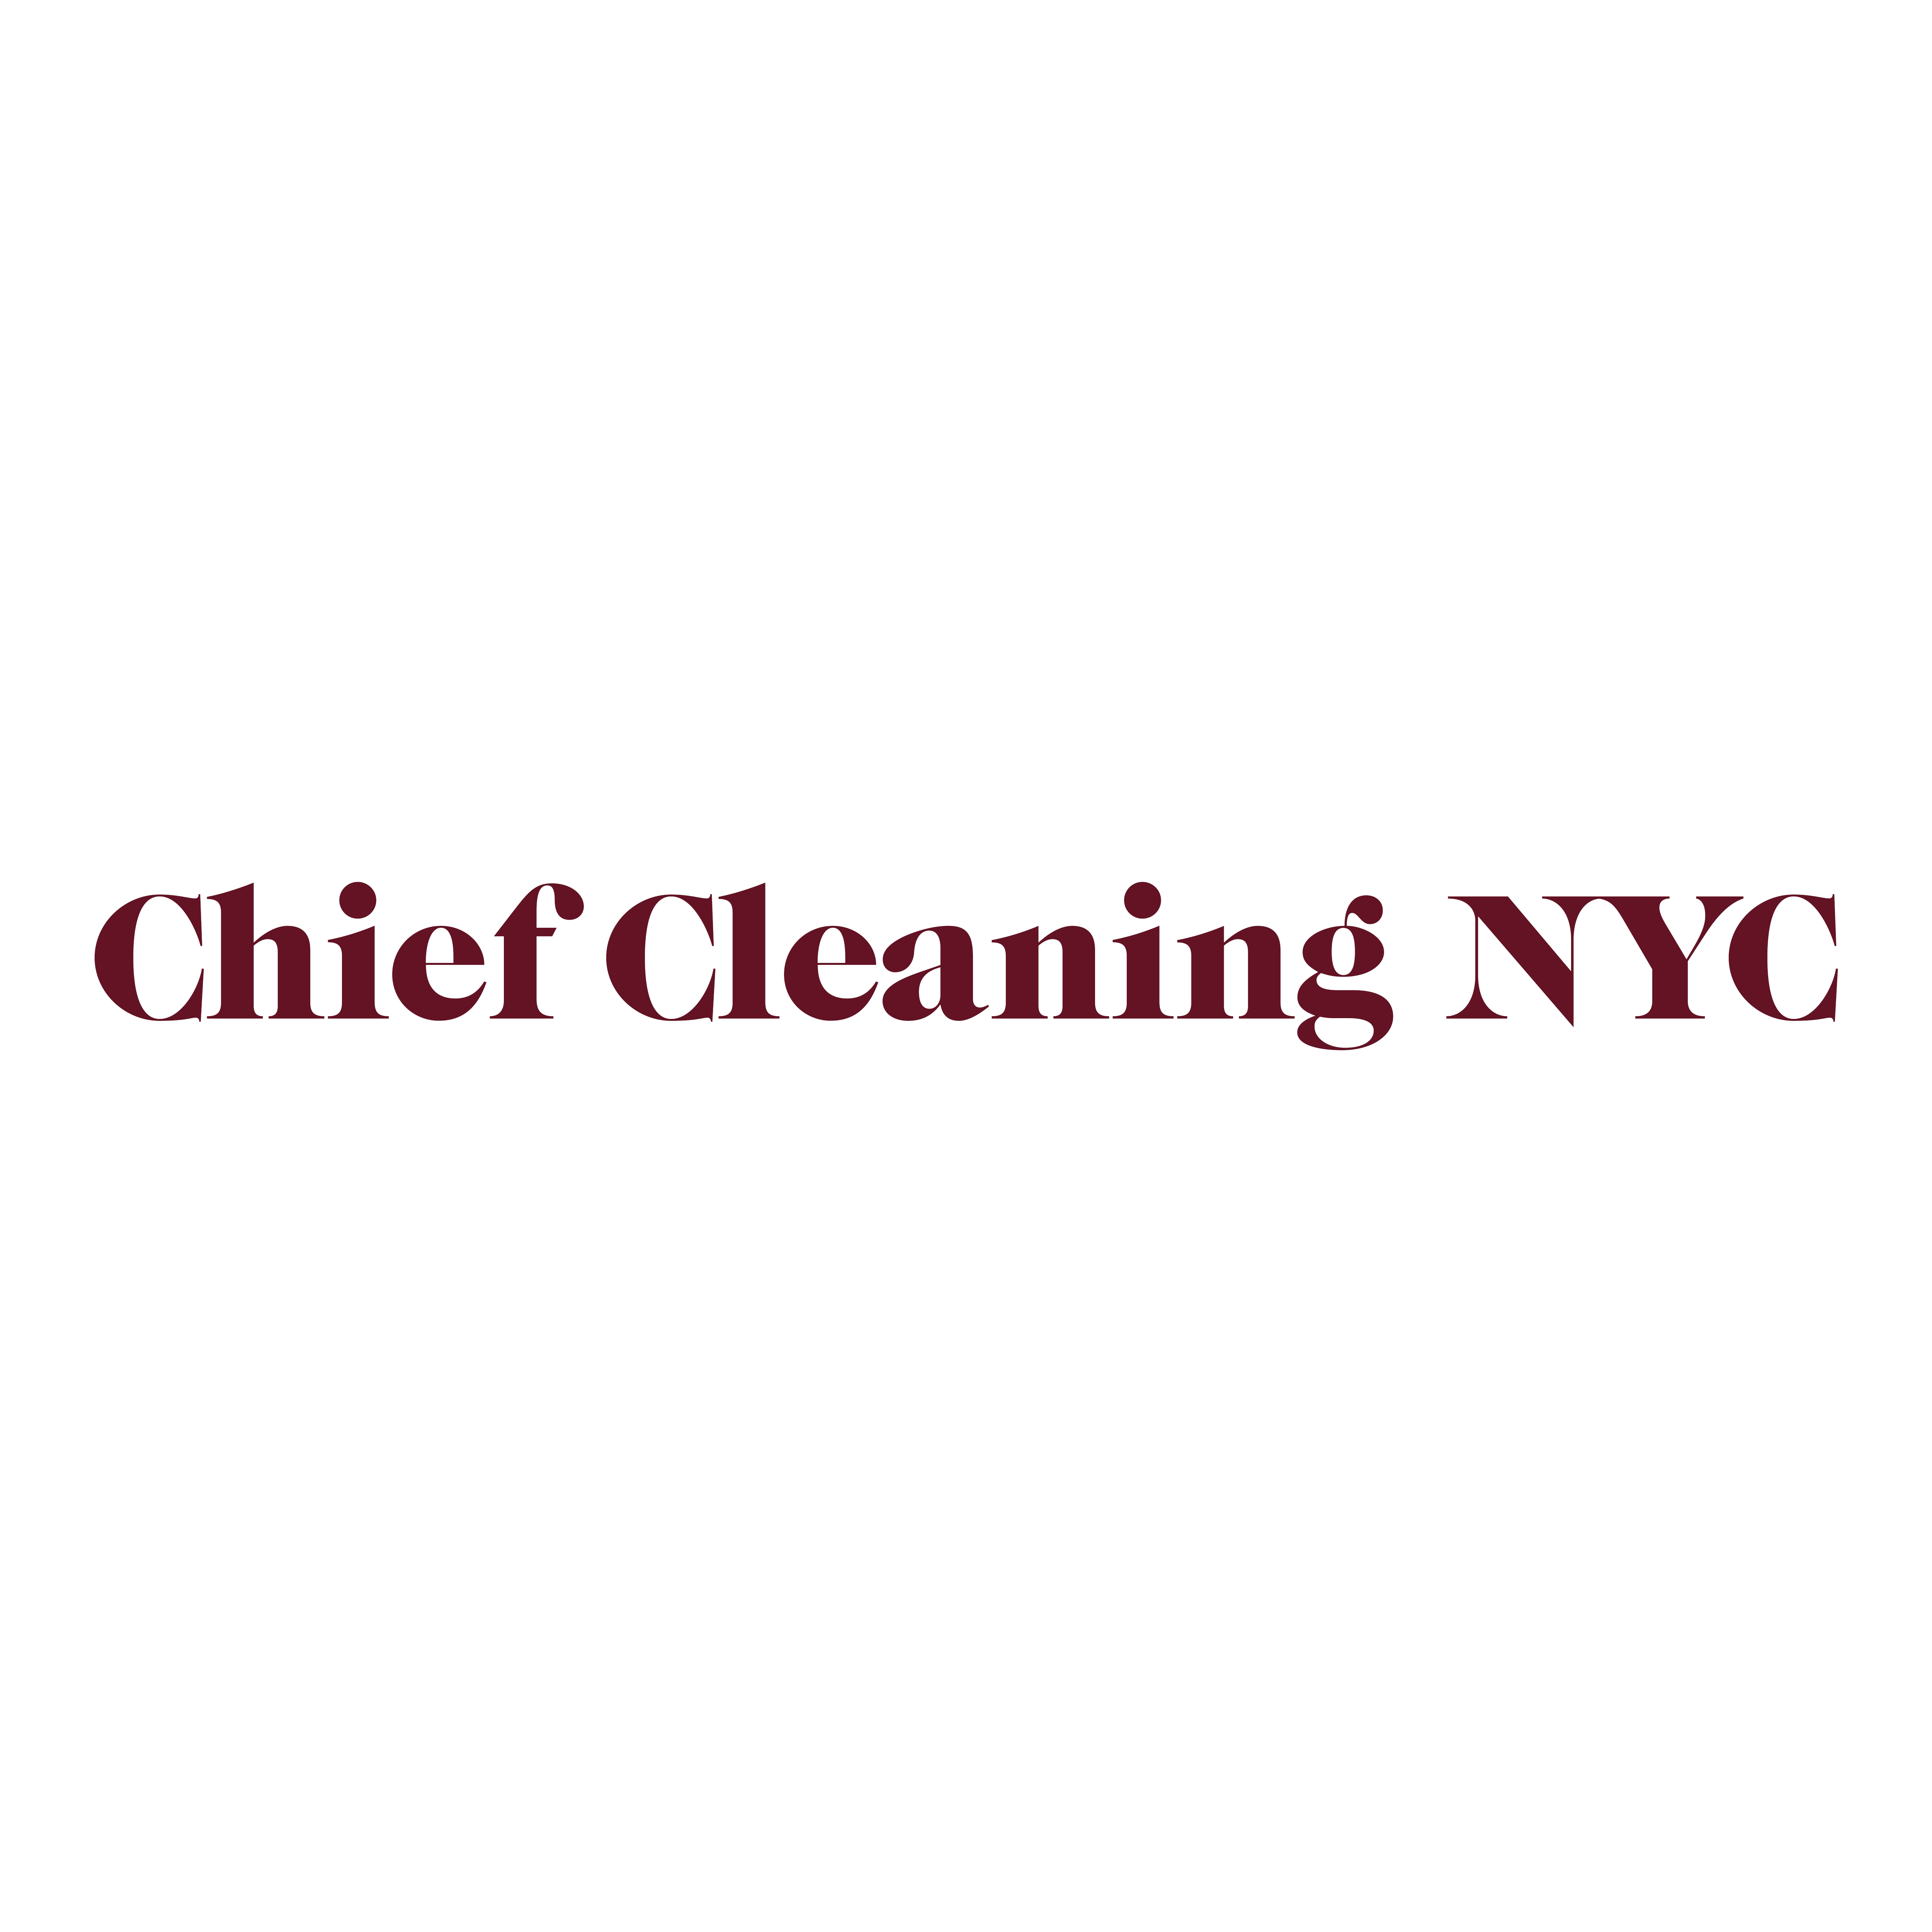 Chief Cleaning NYC